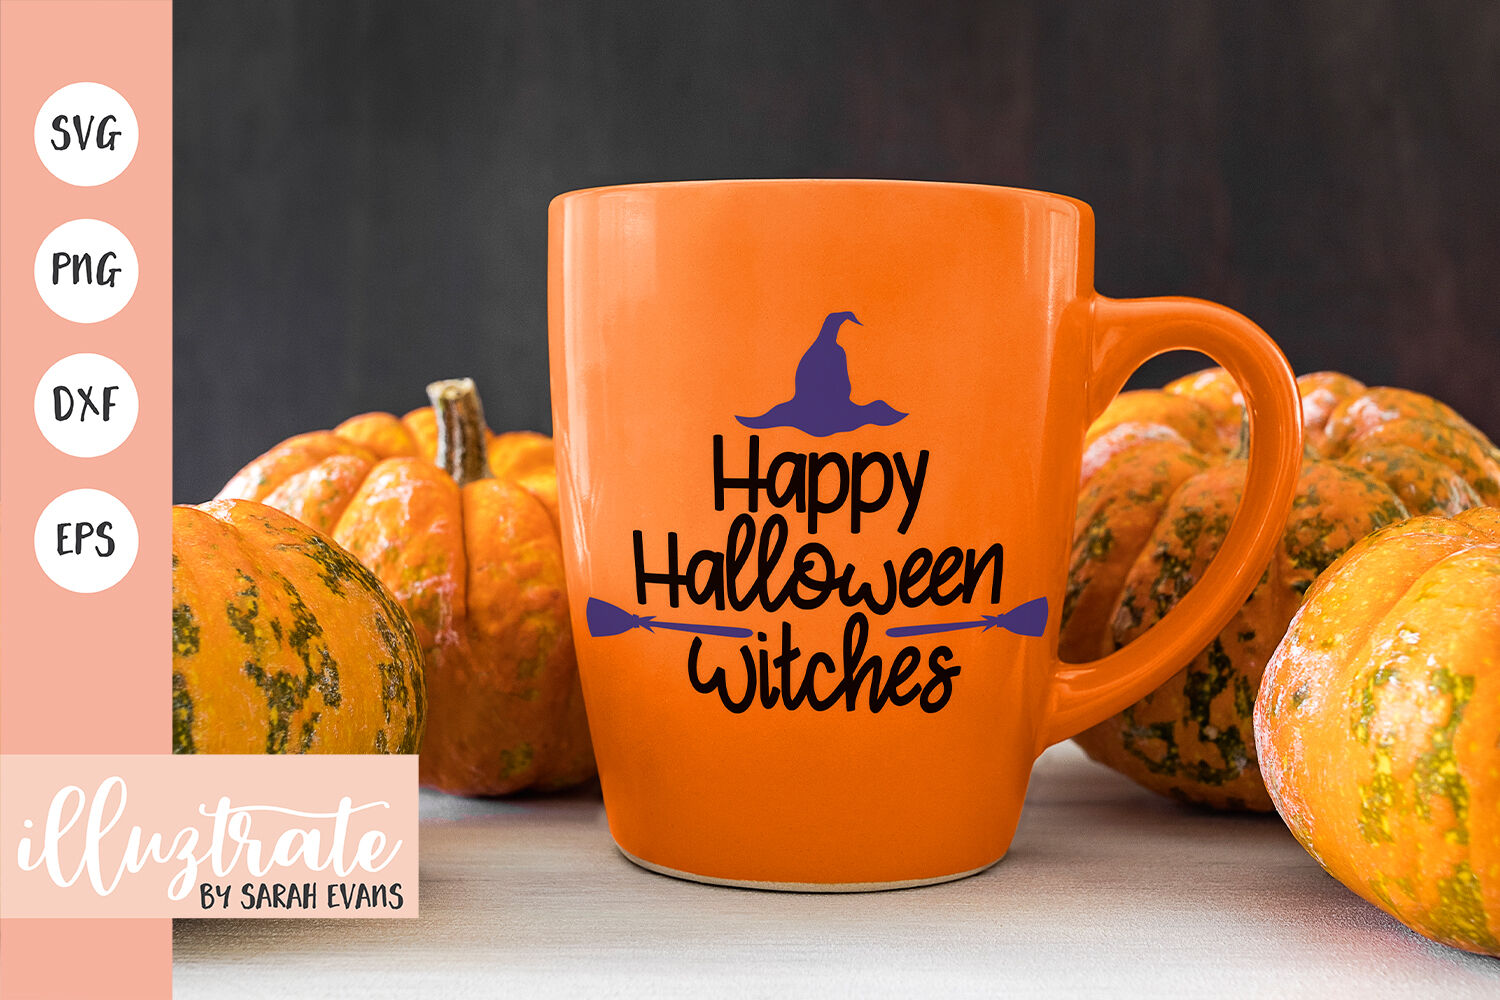 Happy Halloween Witches Svg Cut Files Halloween Svg Cut Files By Illuztrateuk Thehungryjpeg Com